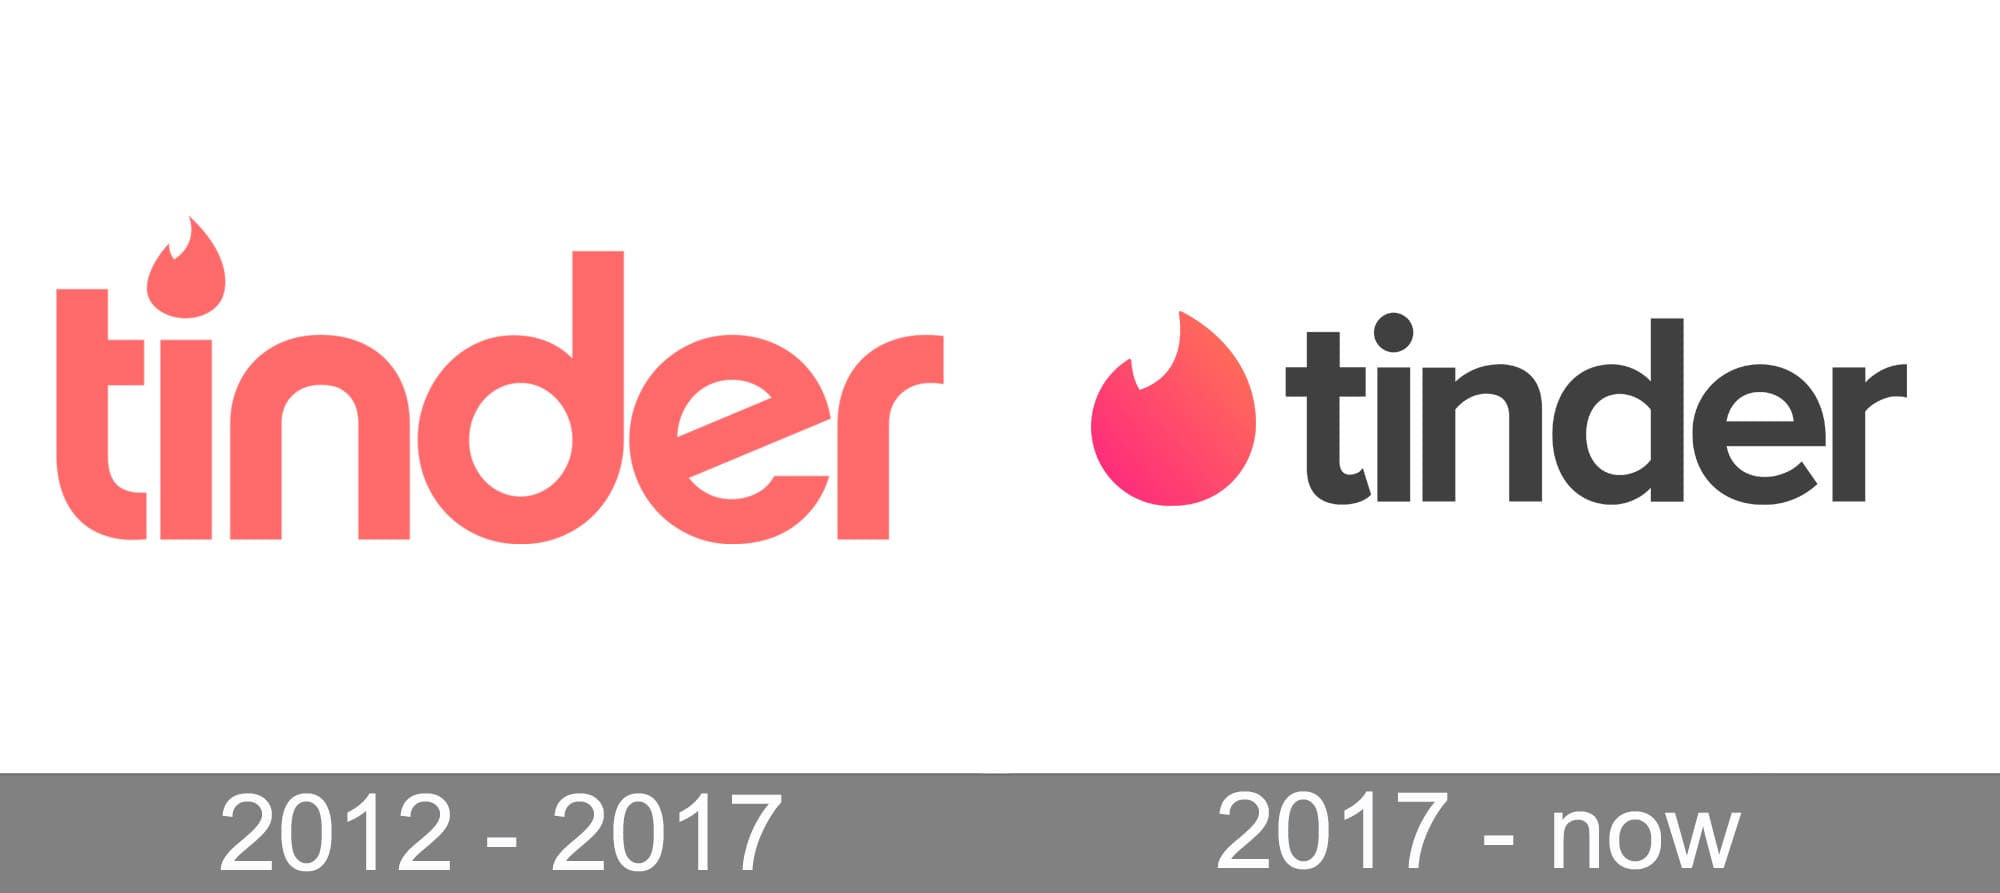 Tinder what icons mean do the How to